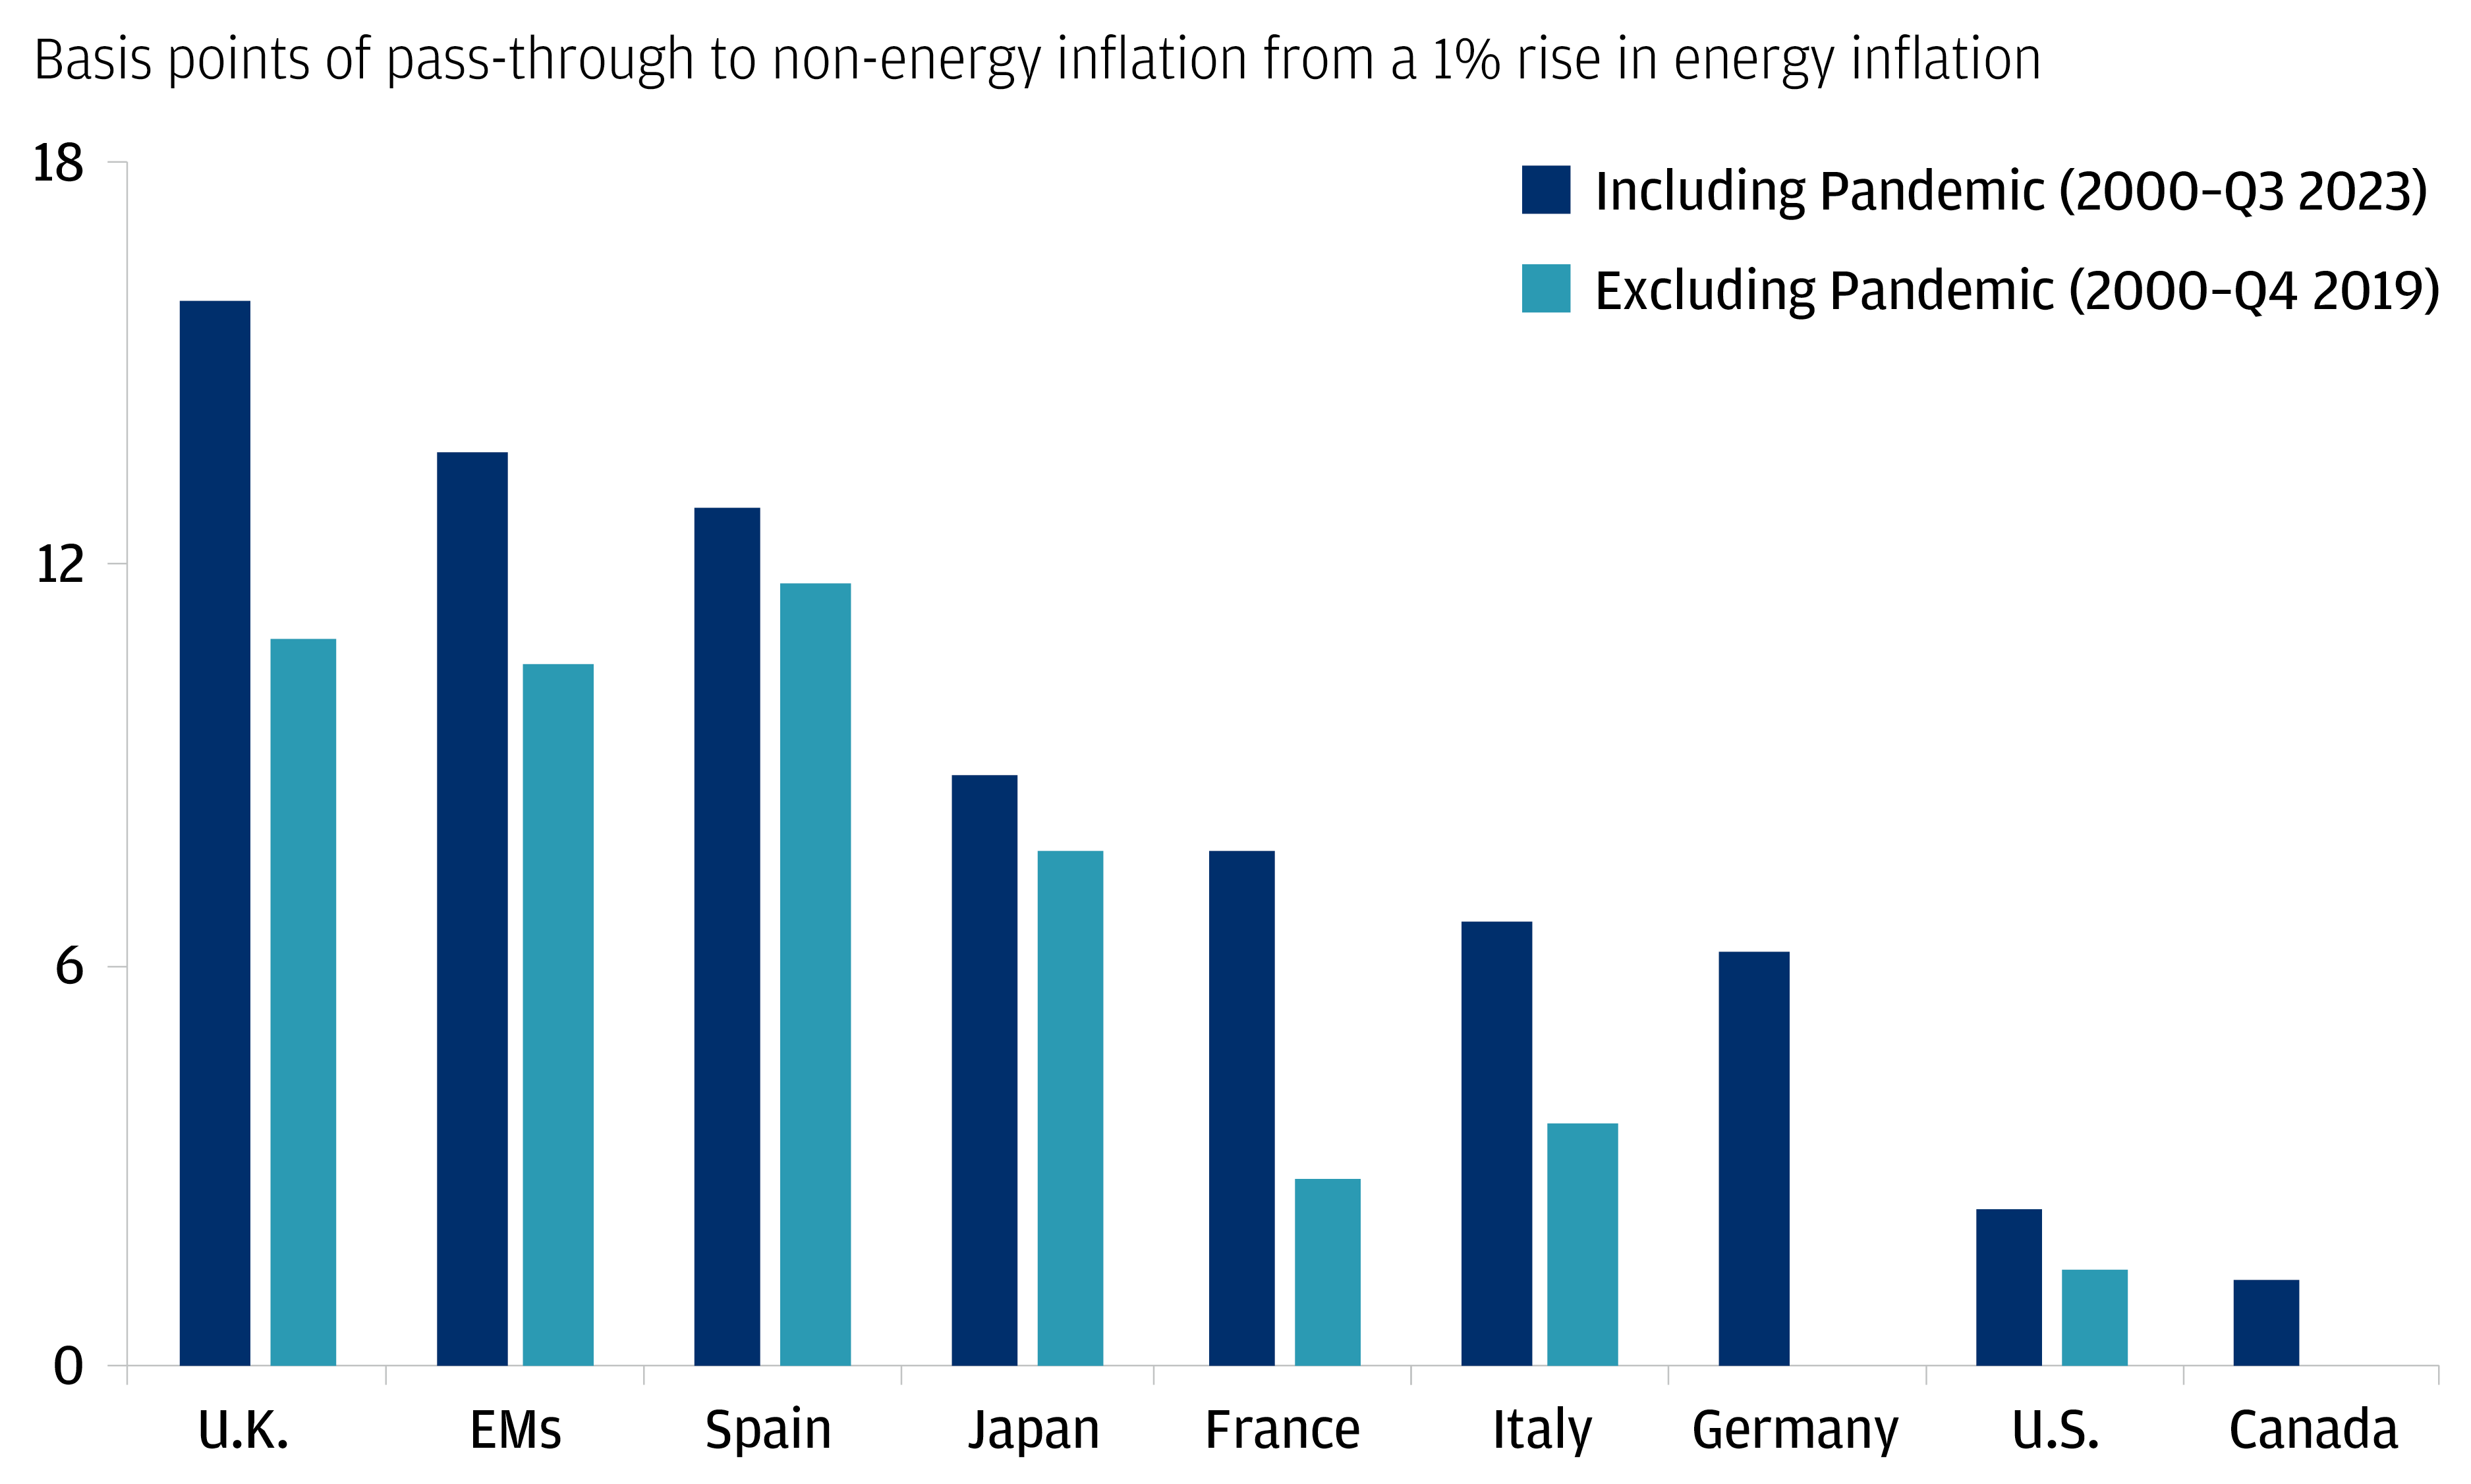 The chart describes the basis points of passthrough for 1% rise in energy. 